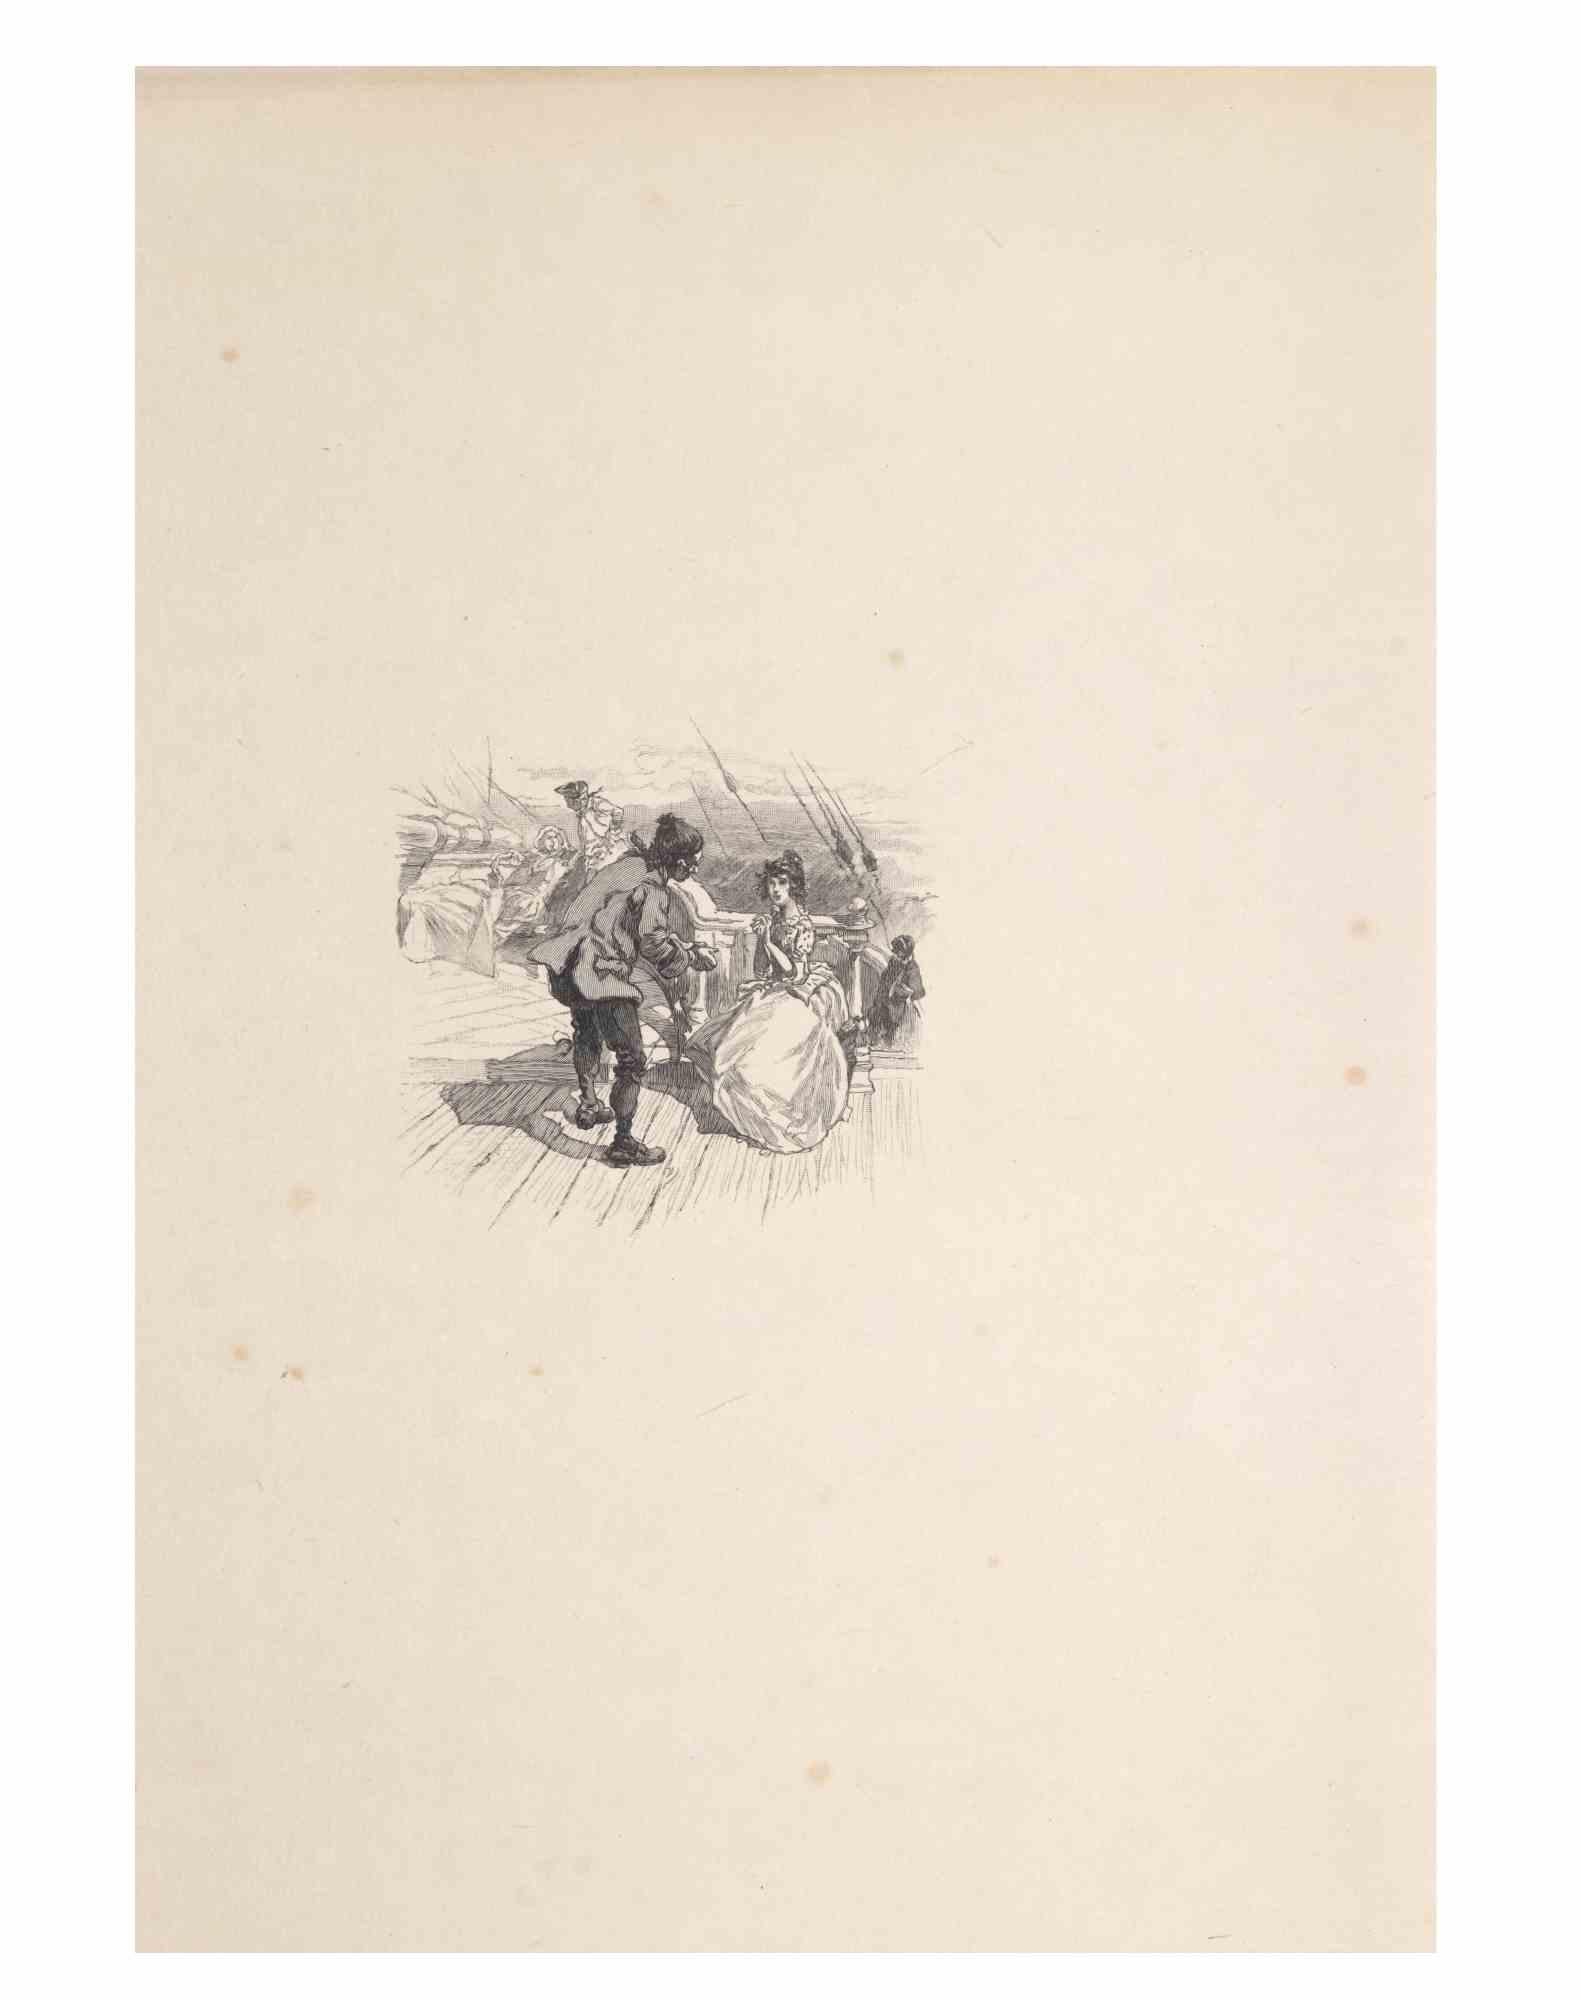 Petits Contes à ma Sœur is a Lithograph on paper realized by Hégésippe Moreau in 1838.

The artwork is in good condition.

Hégésippe Moreau (1810-1838) was a French lyric poet. The romantic myth was solidified by the publication of his complete